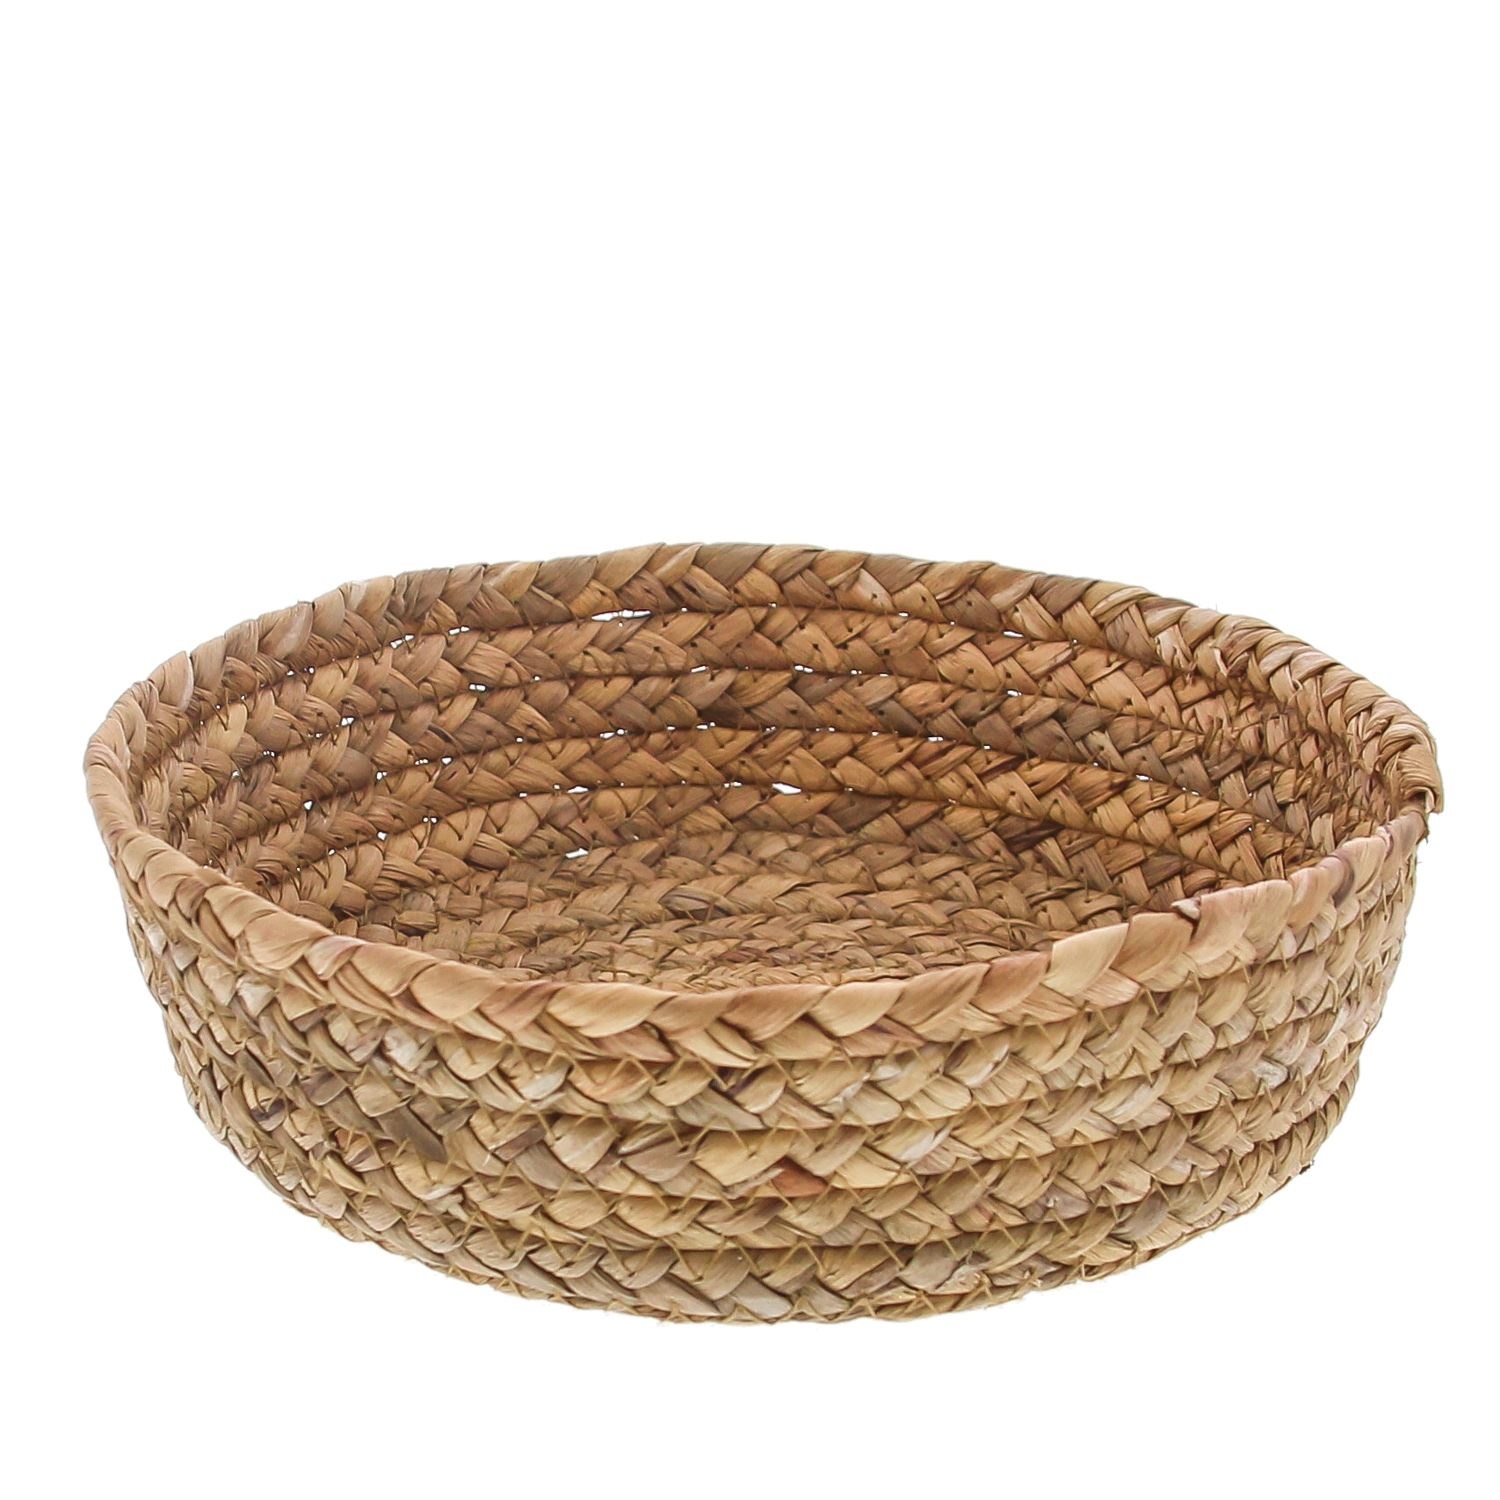 Basket grass cord natural round low - 210*60*210mm - 10 pieces